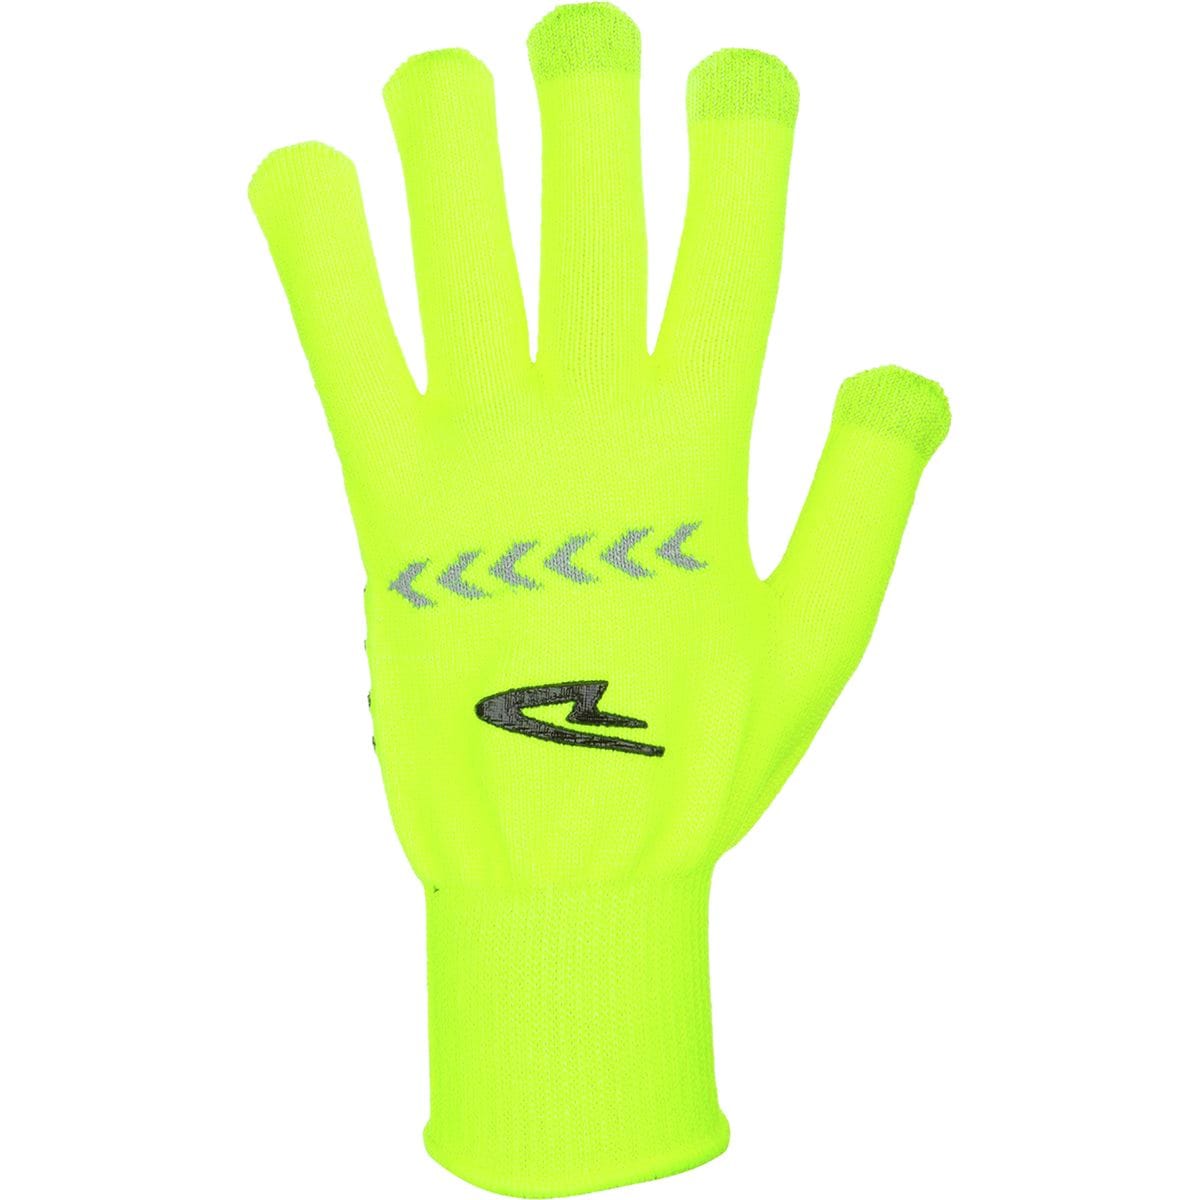 DeFeet Electronic Touch Gloves Reflective Men's